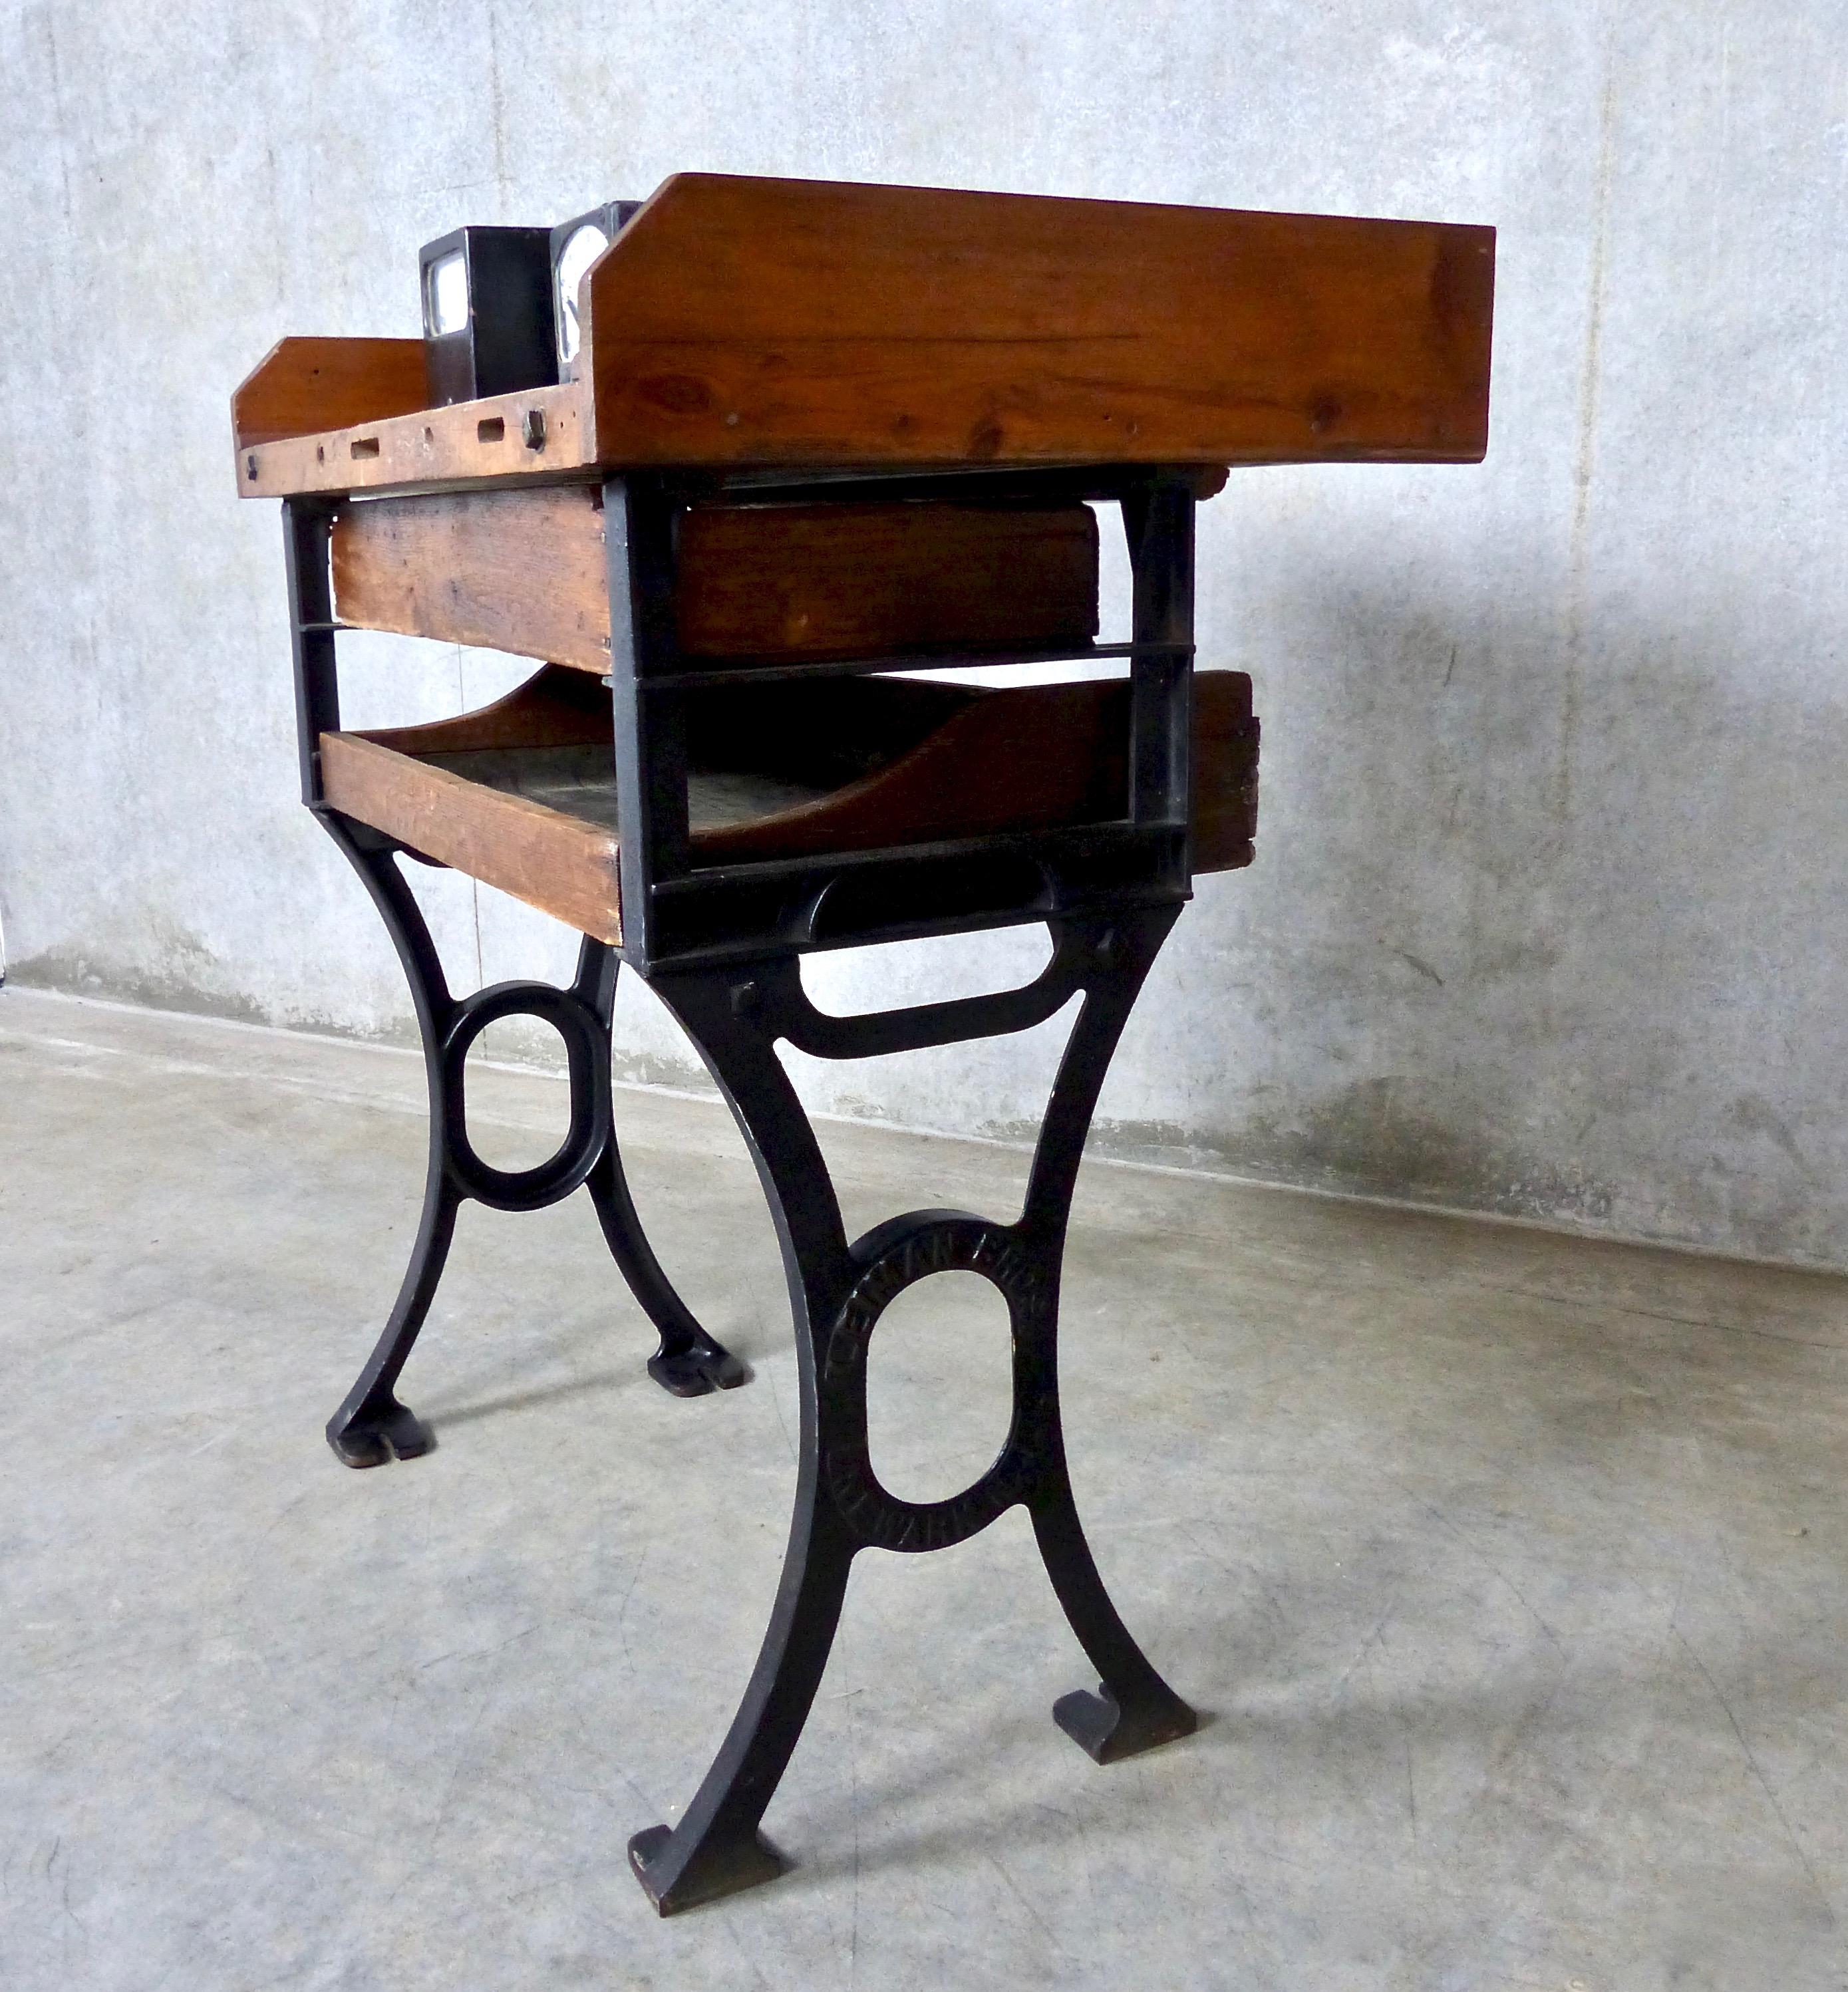 A rare, early 1900s jeweler’s or watchmaker’s workstation by Leiman Bros. of Newark, NJ, which specialized in outfitting entire shops with machinery and equipment. The compact work bench features a cast iron frame, two removable drawers, and a